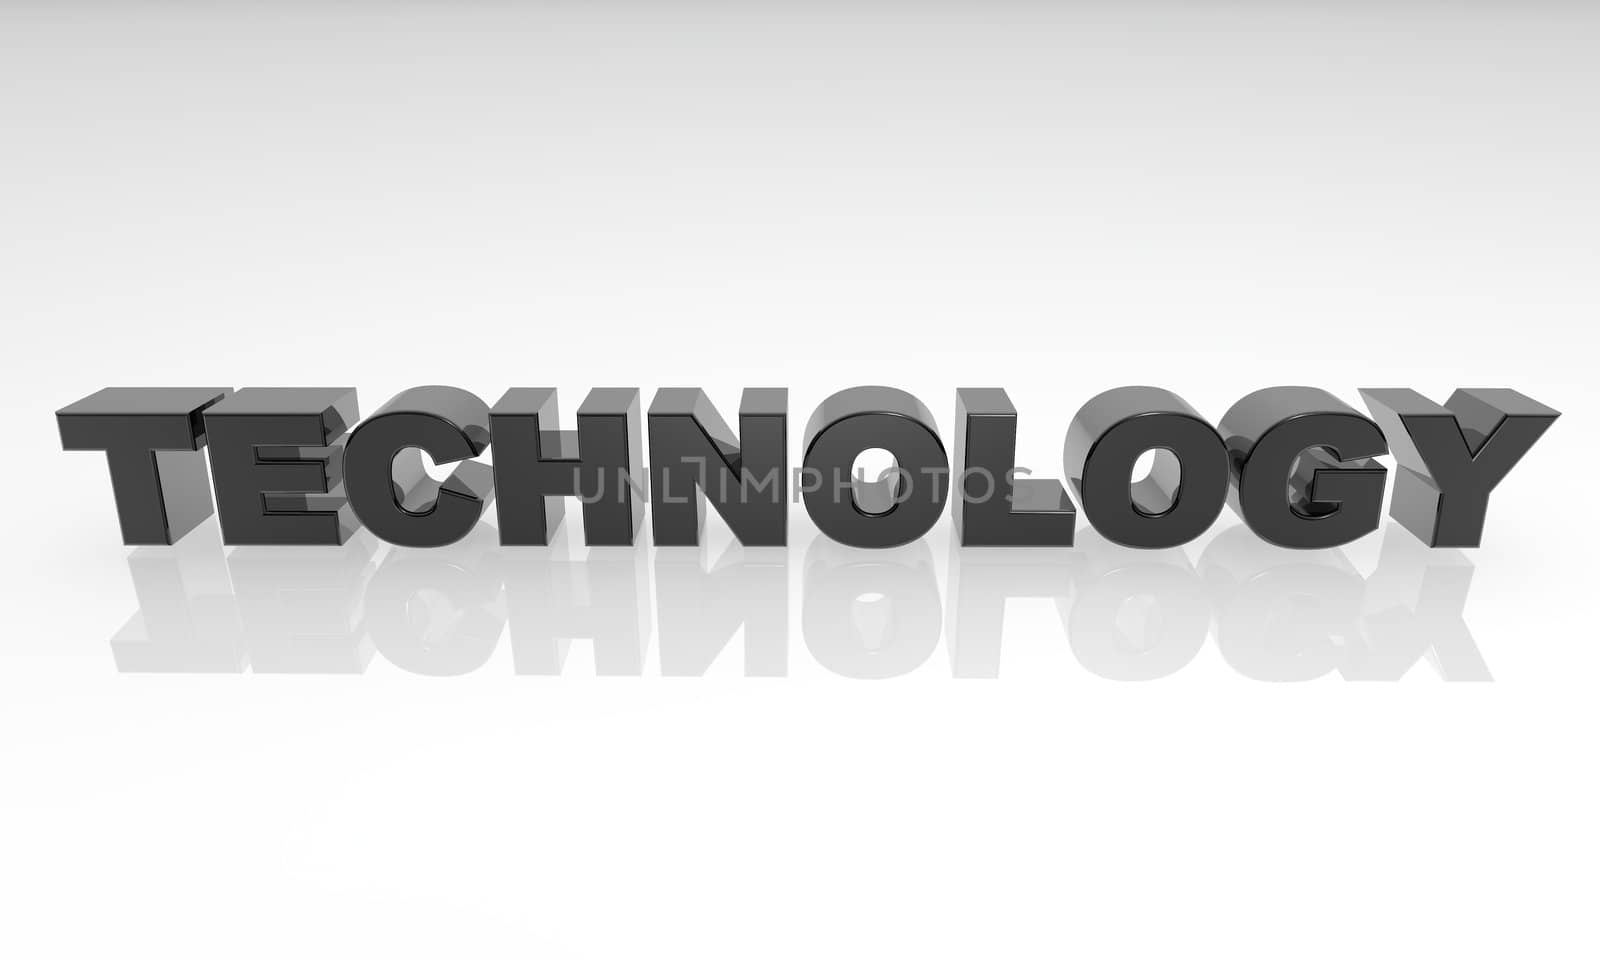 Buzzword technology 3d Text on a white background with reflection